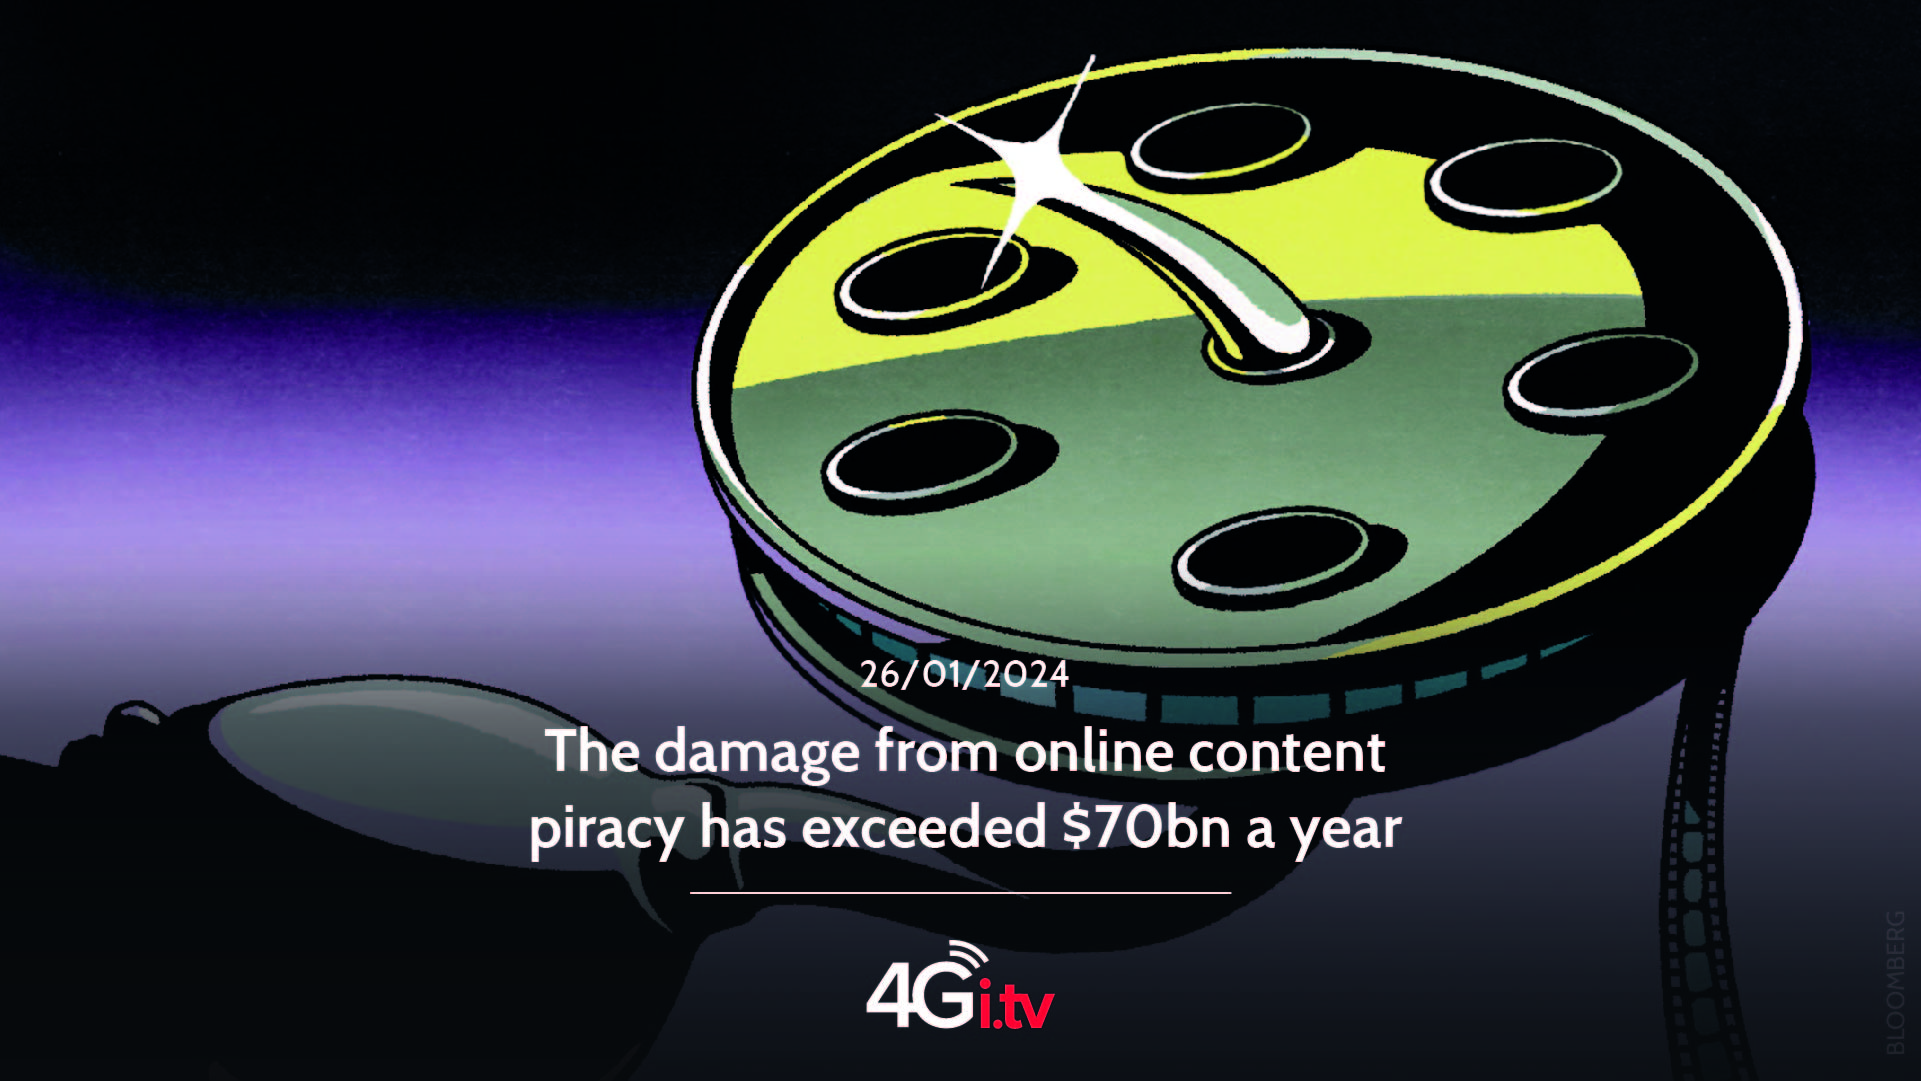 Подробнее о статье The damage from online content piracy has exceeded $70bn a year